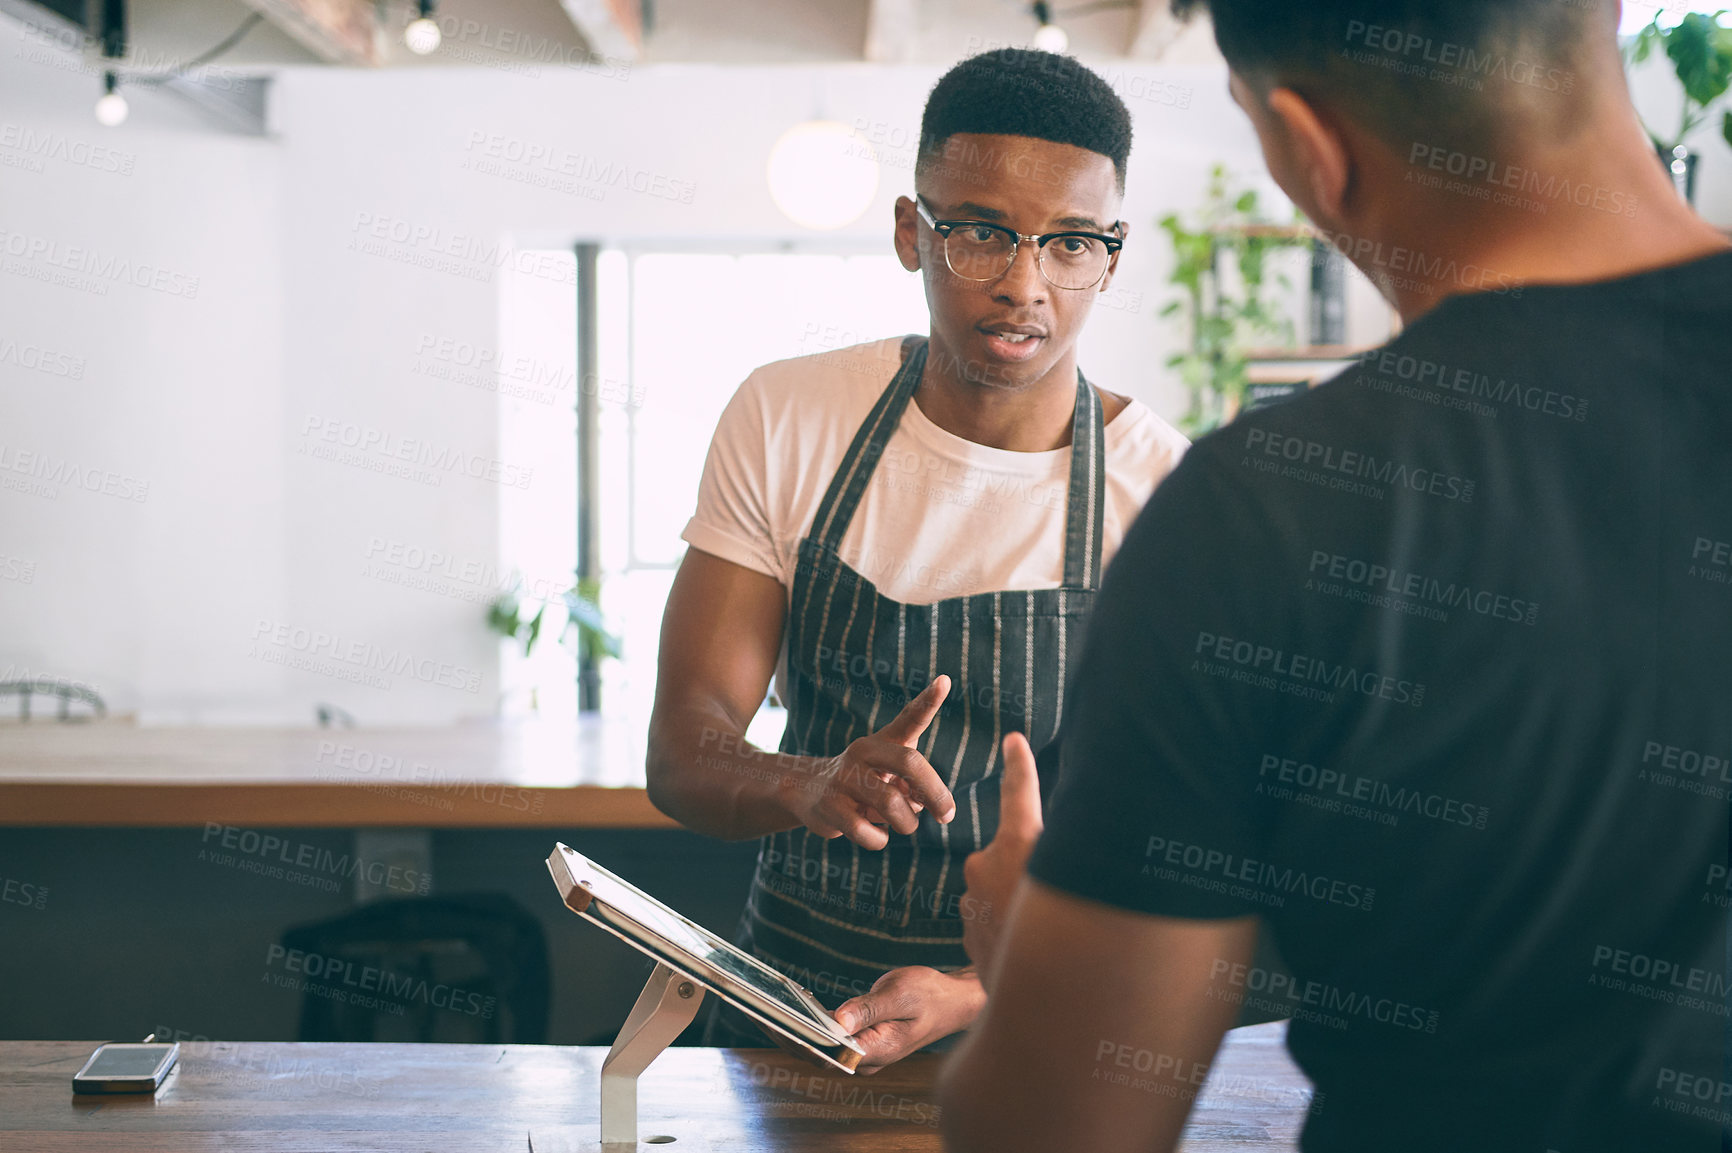 Buy stock photo Shot of a young man using a digital tablet while buying coffee in a cafe